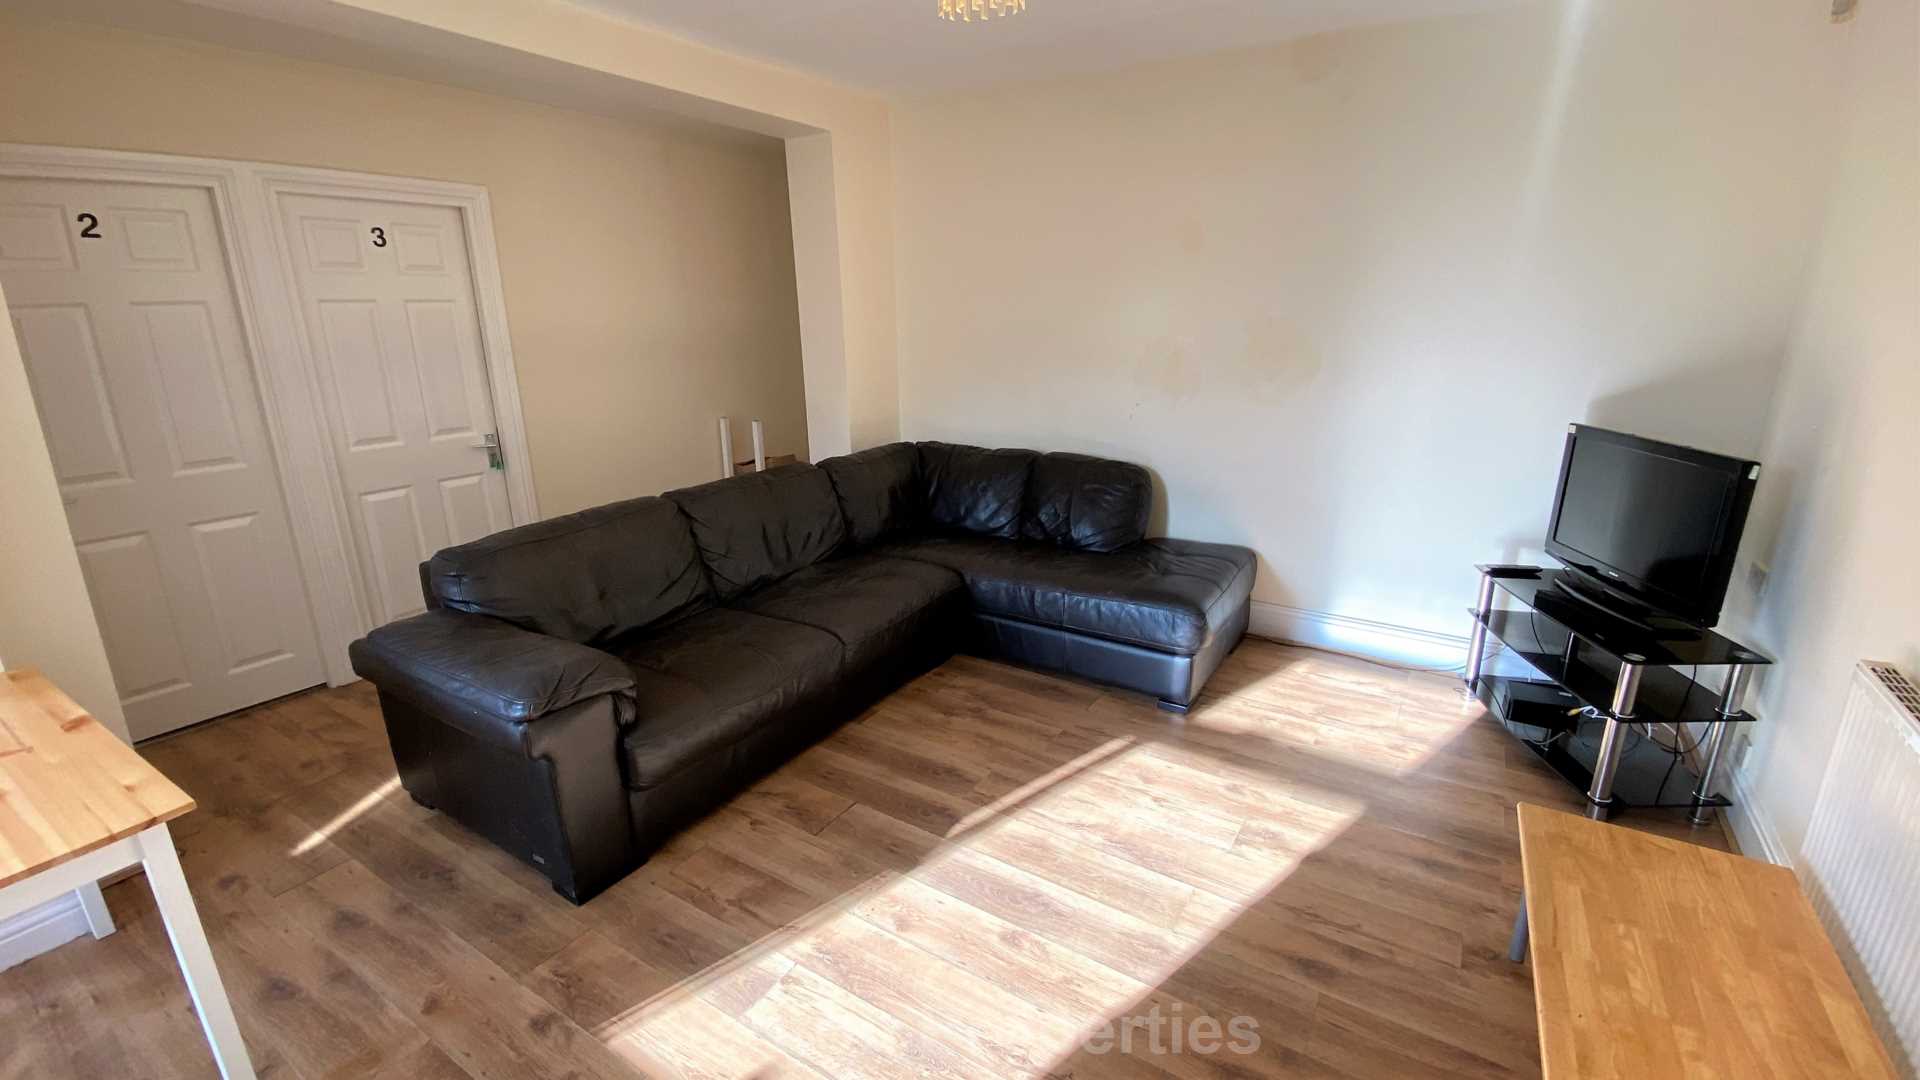 SEE VIDEO TOUR, £115 pppw excluding bills, Mauldeth Road, Withington, Image 4